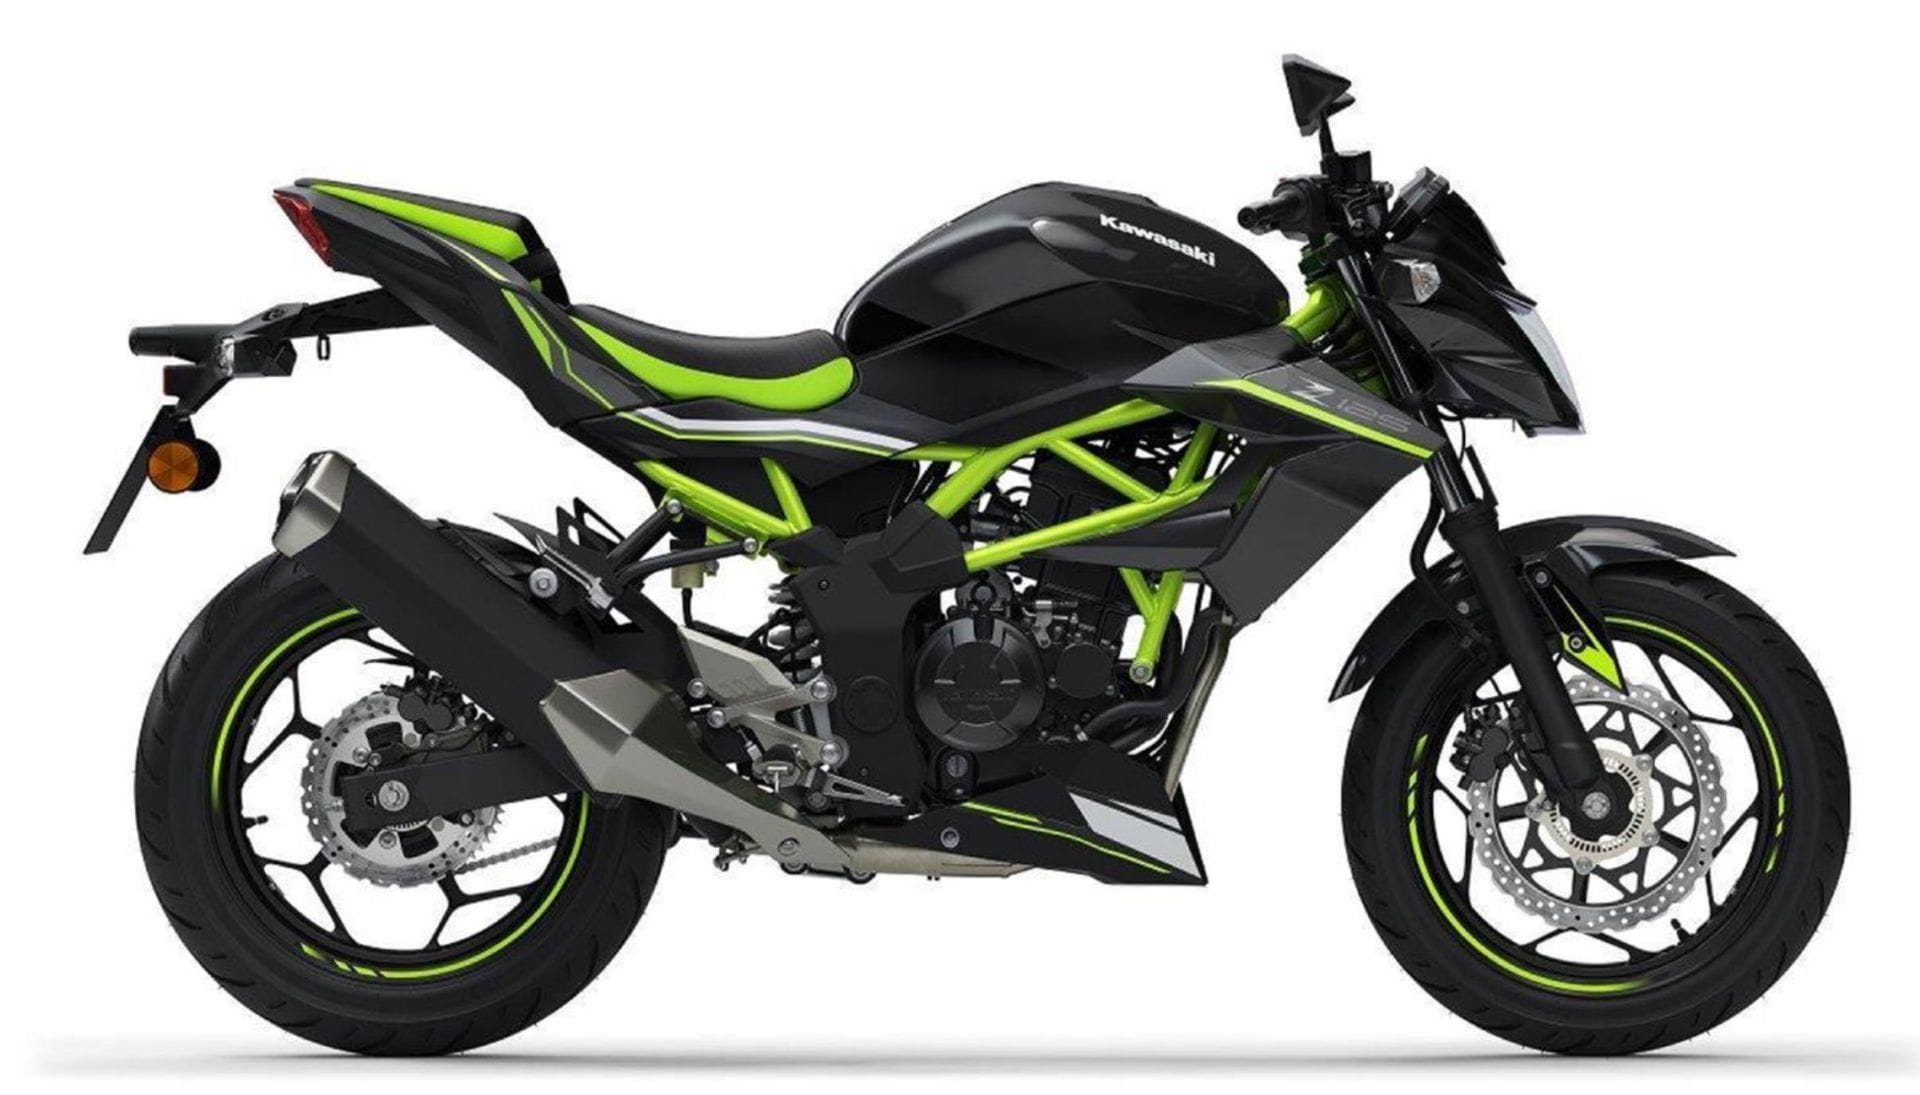 Updated Kawasaki Z125, Ninja 125 and Z900 RS for 2021
- also in the App MOTORCYCLE NEWS